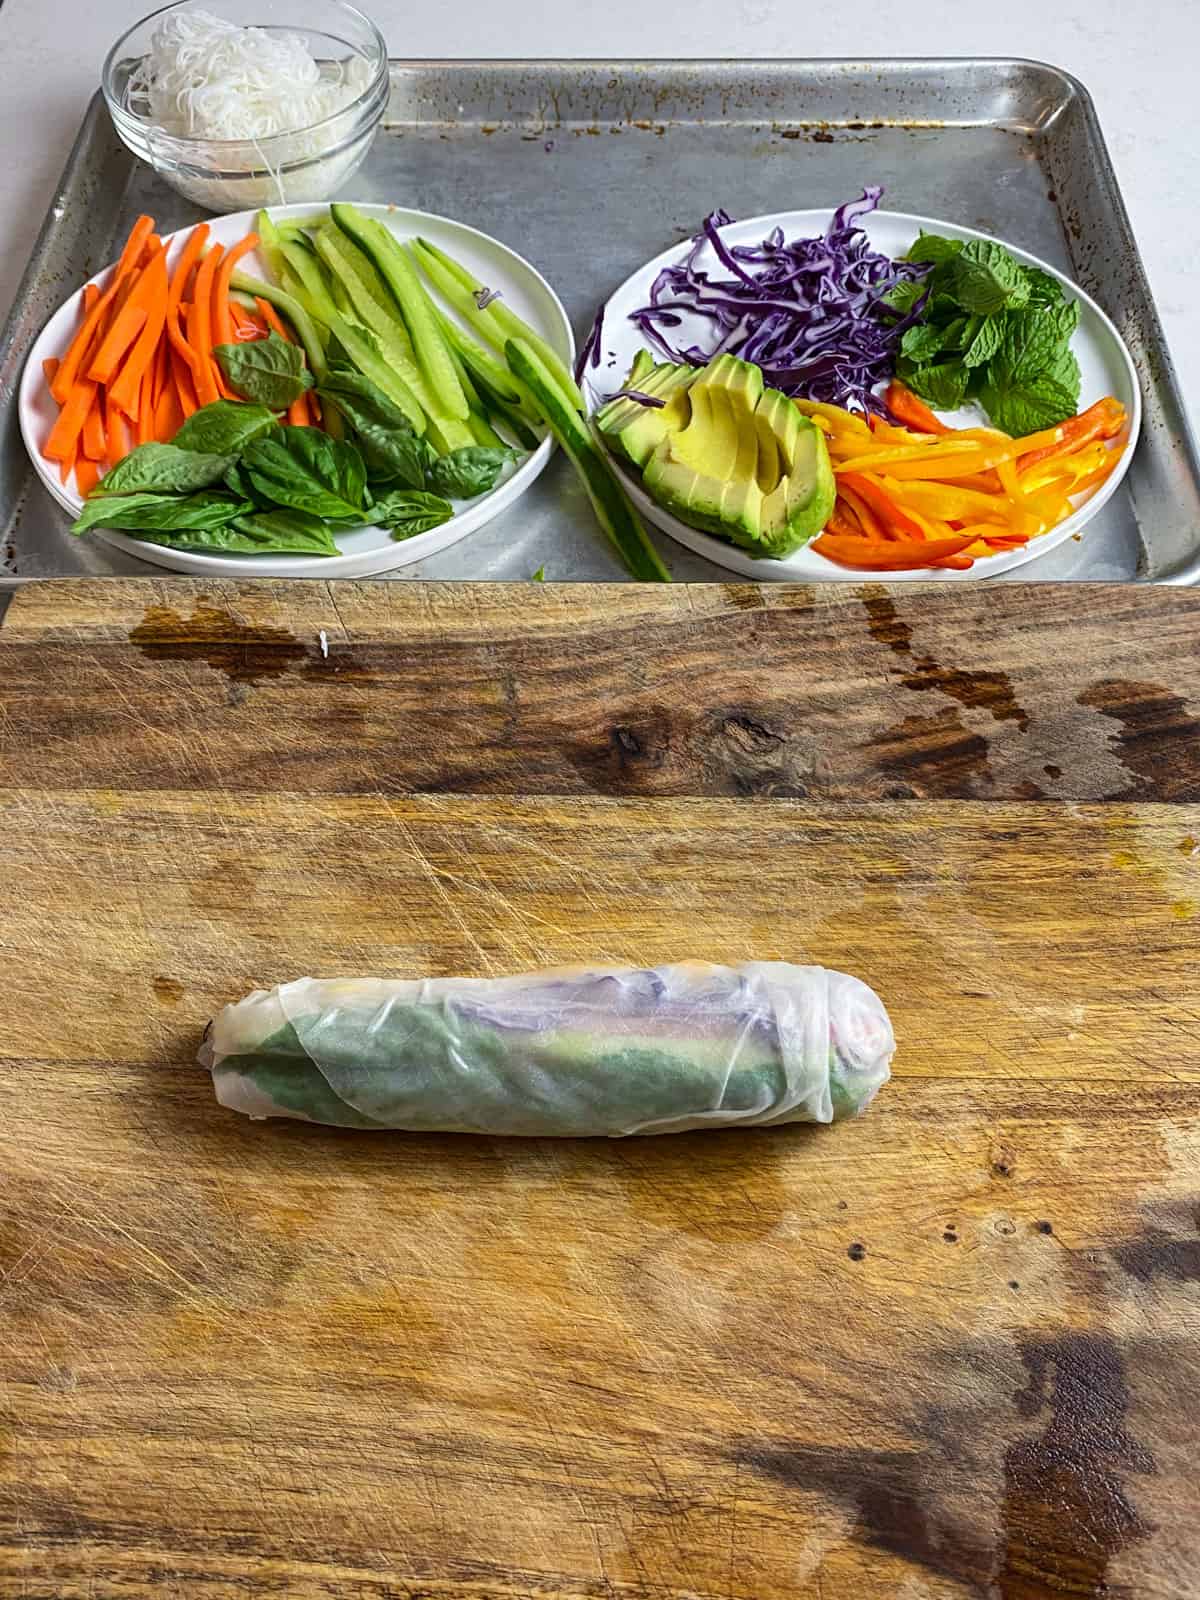 Continue rolling up the rice paper roll so all of the vegetables are tightly rolled in.